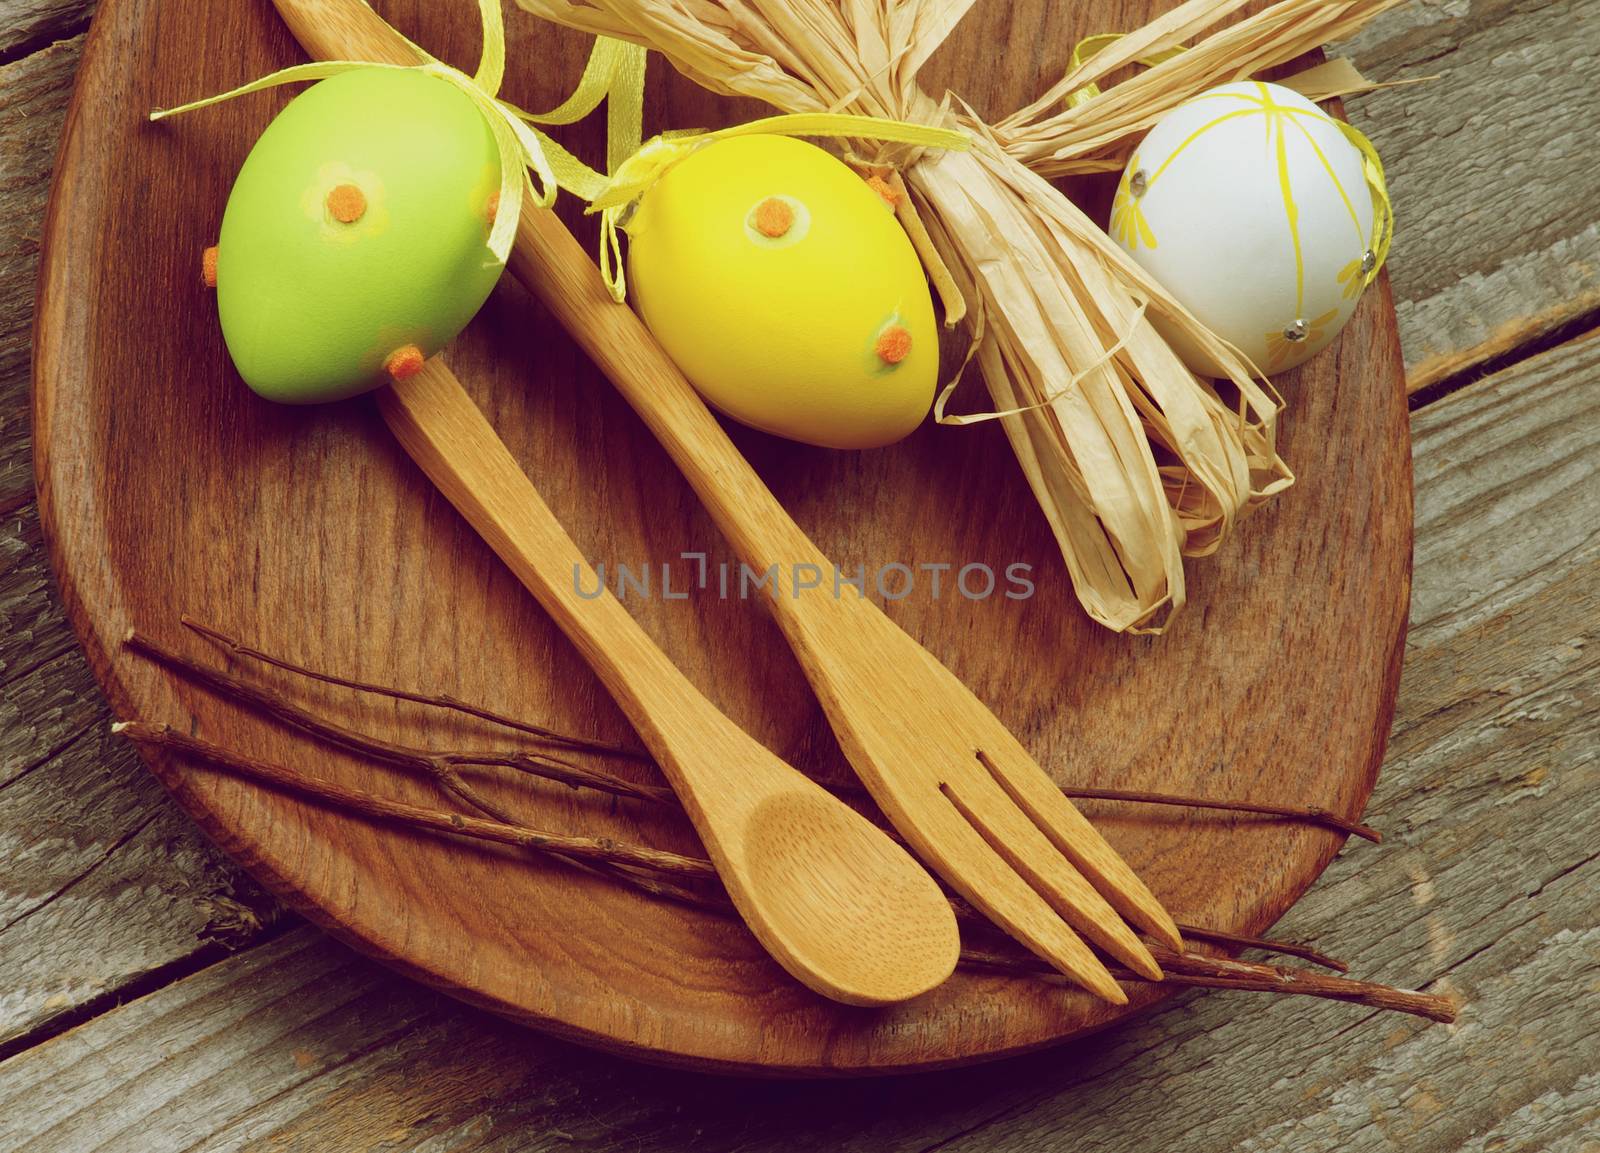 Easter Table Setting with Wooden Fork and Spoon, Colored Eggs and Natural Branches on Wooden Plate closeup on Rustic Wooden background. Retro Styled